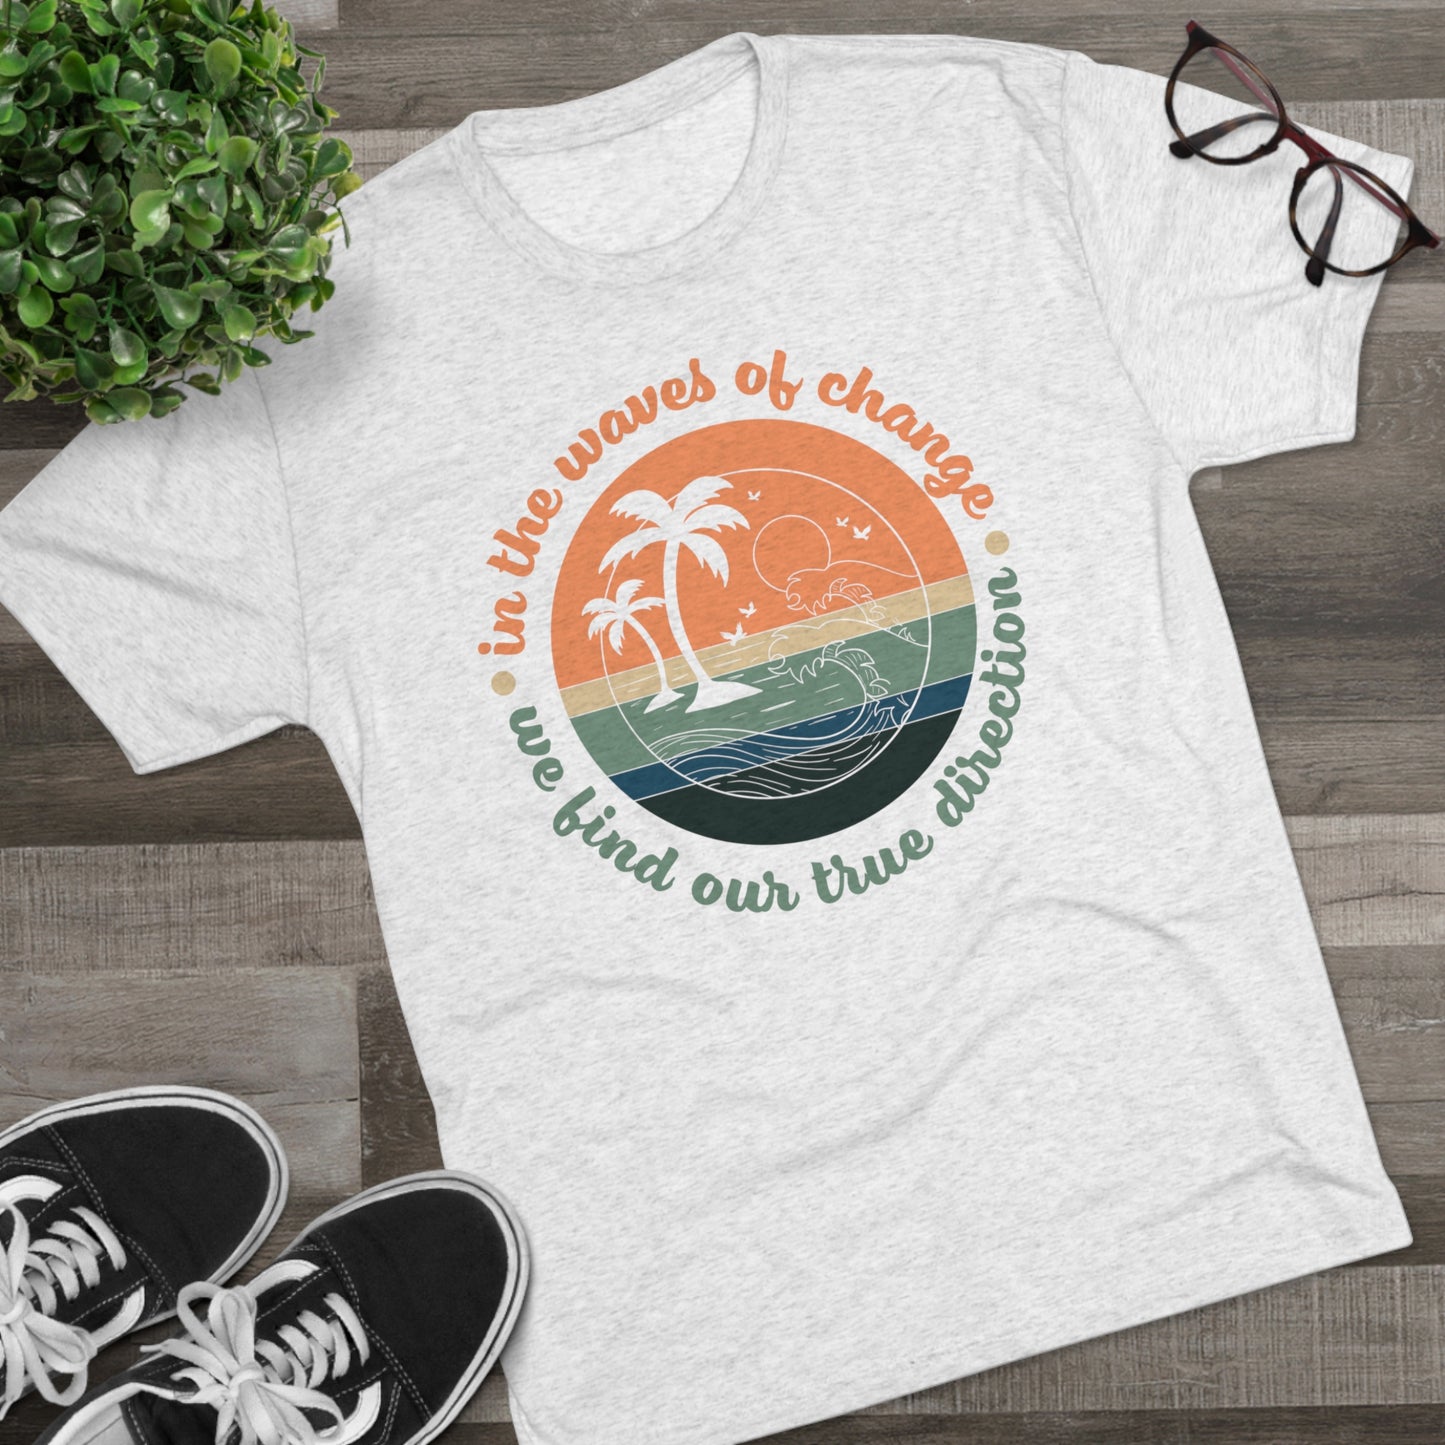 In The Waves of Change Unisex Tri-Blend Crew Tee